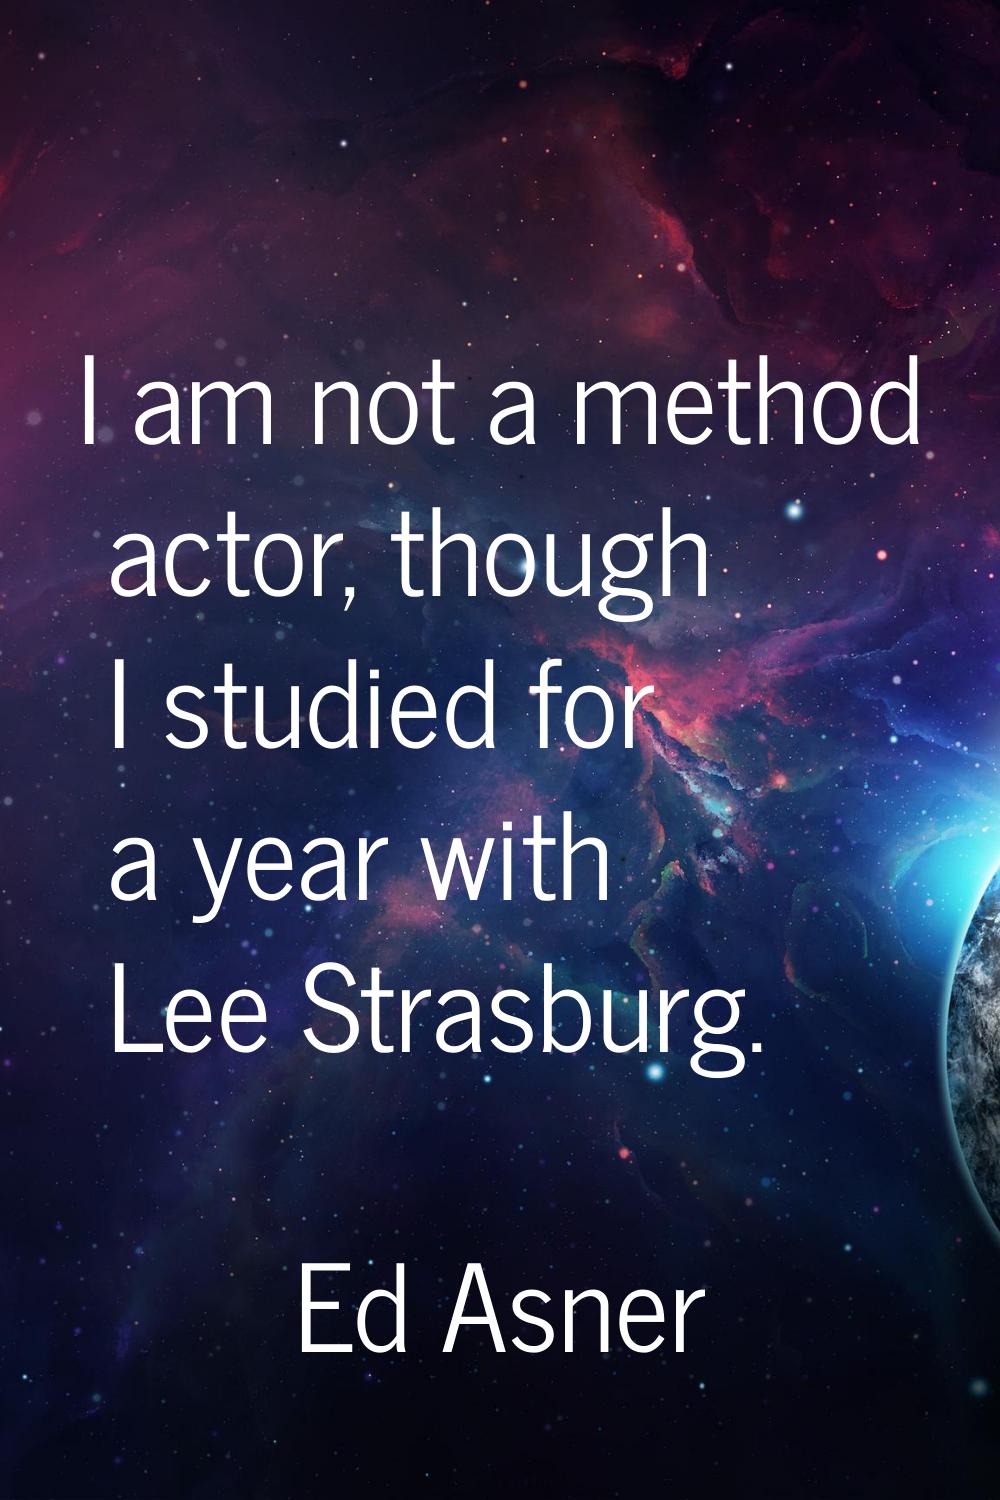 I am not a method actor, though I studied for a year with Lee Strasburg.